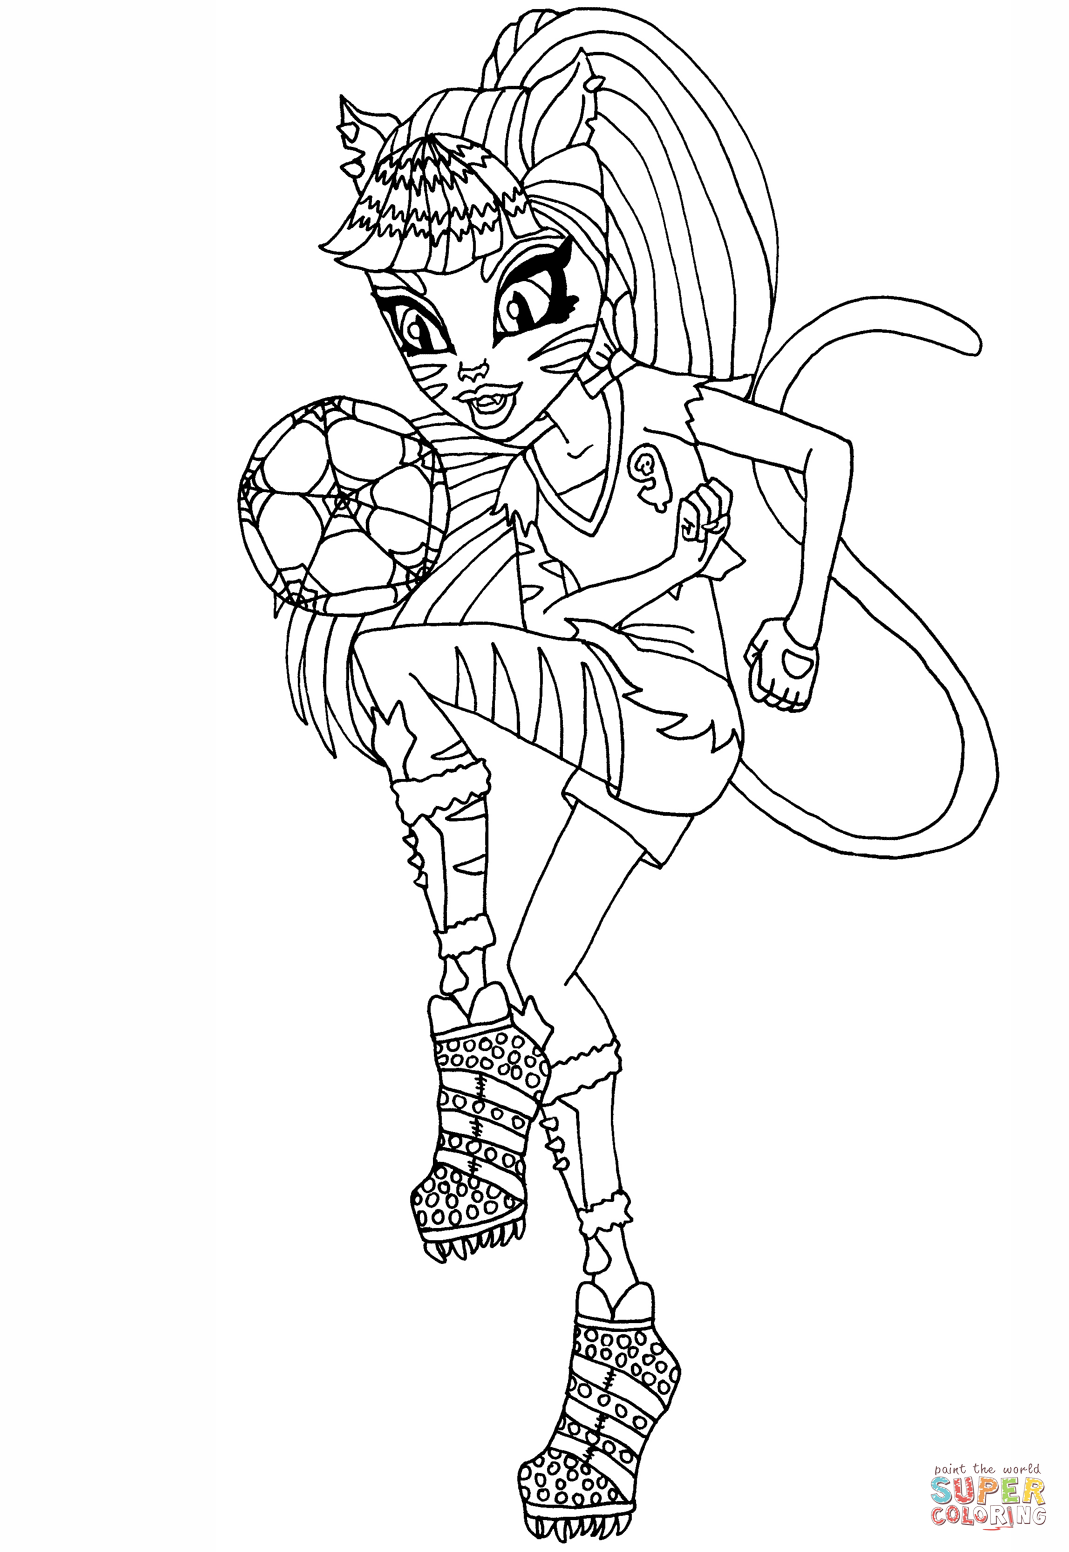 Ghoul sports toralei coloring page free printable coloring pages